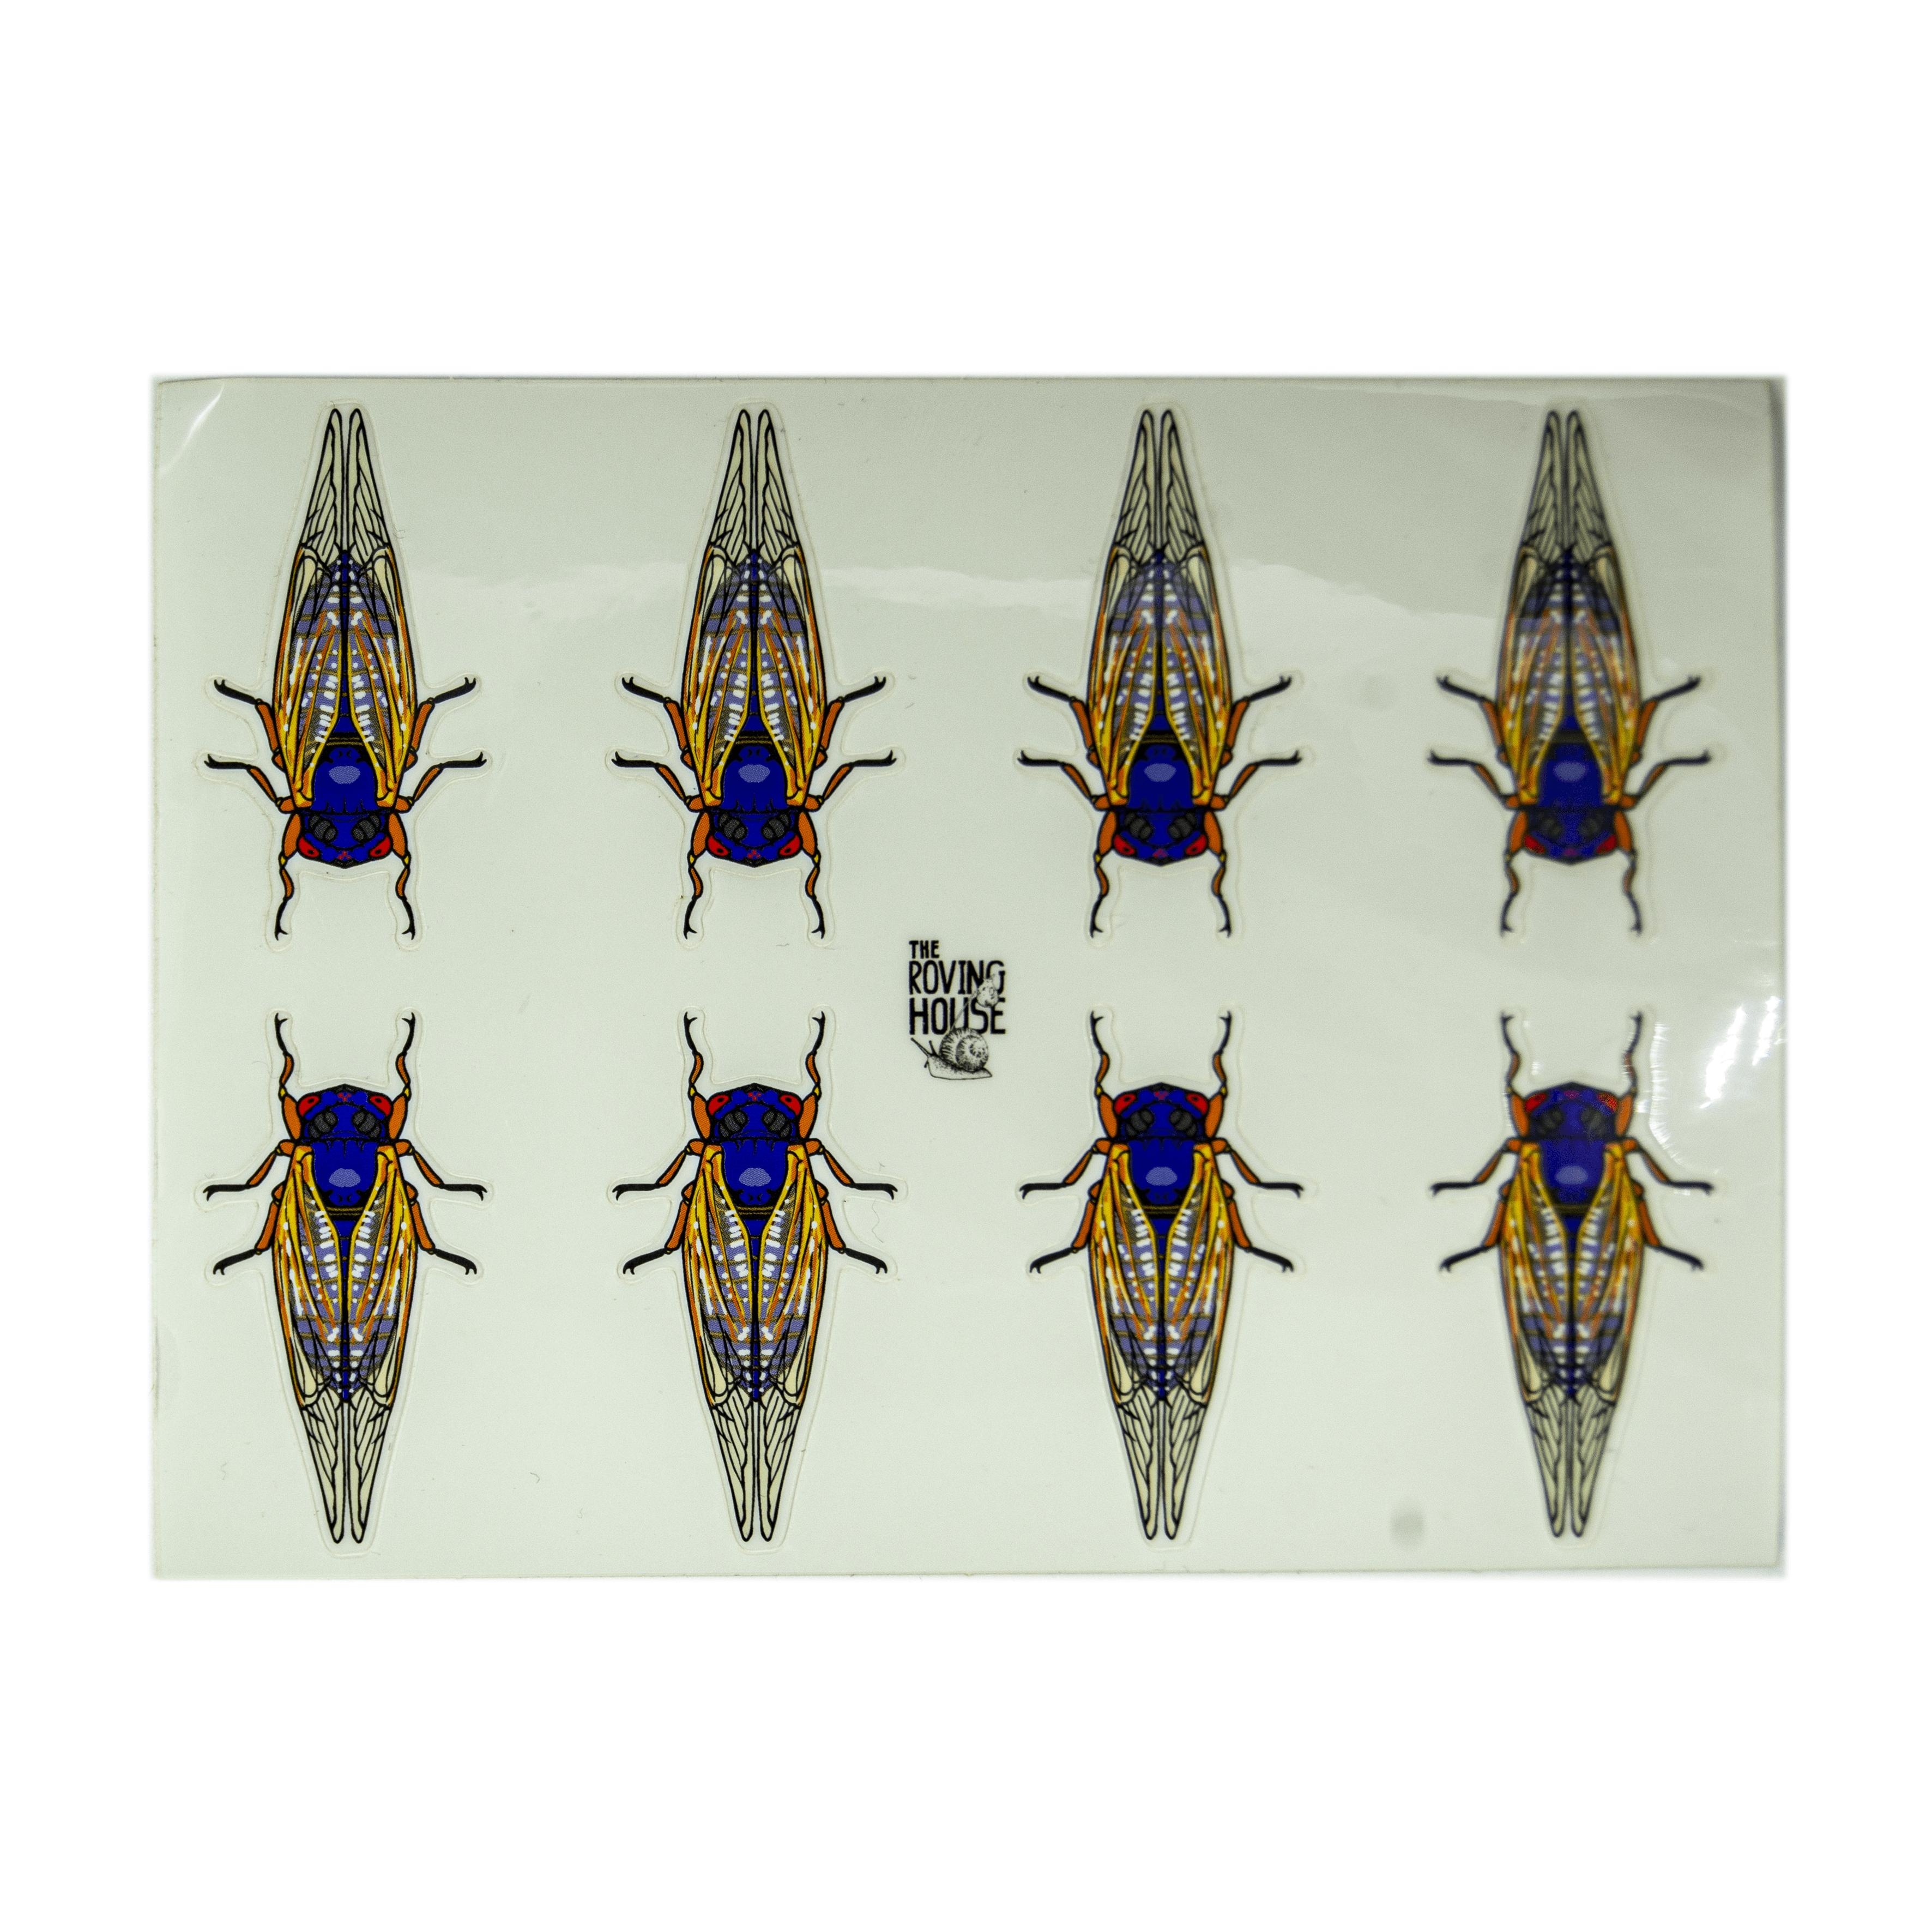 A sticker sheet of 8 periodical cicada insects, with bright yellows, blues, and reds.